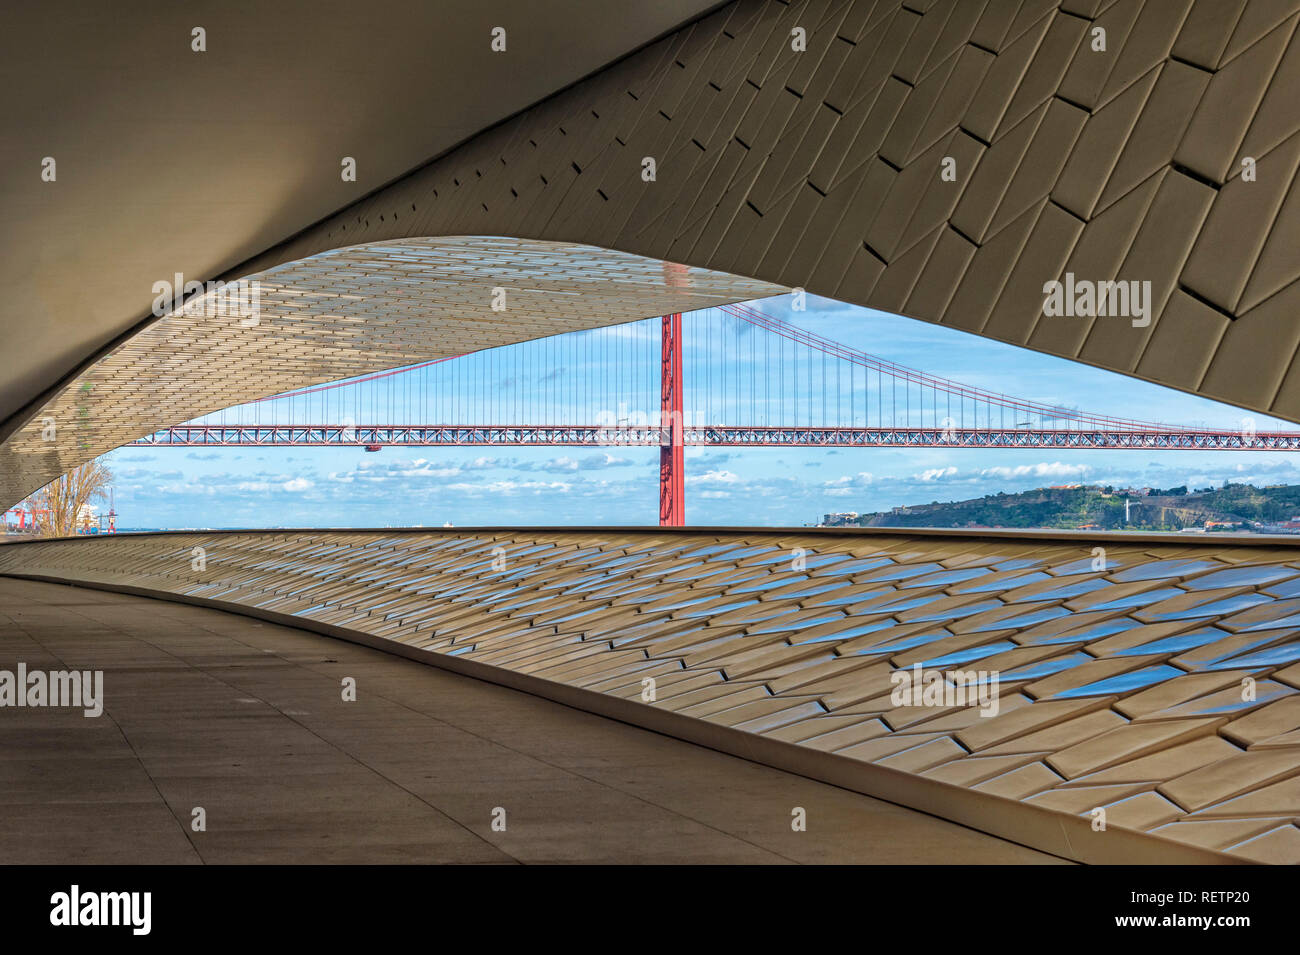 25 April Bridge, former Salazar bridge, over the Tagus river viewed from the MAAT, Museum of Art Architecture and Technology, Lisbon, Portugal Stock Photo